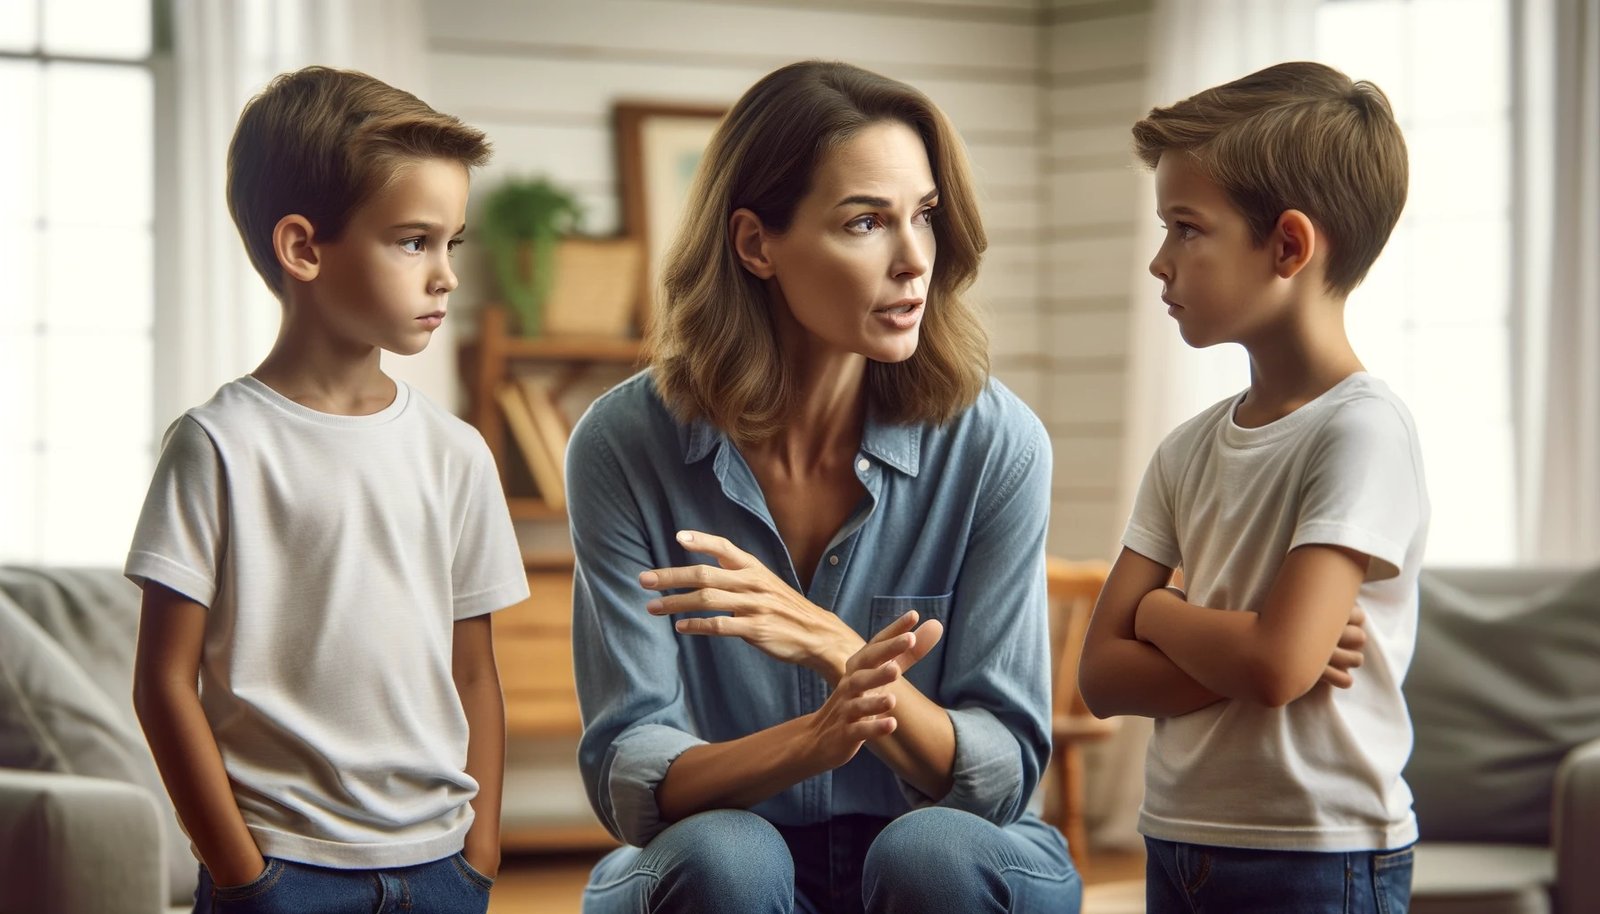 A mother speaking firmly to her two young sons after they've argued.